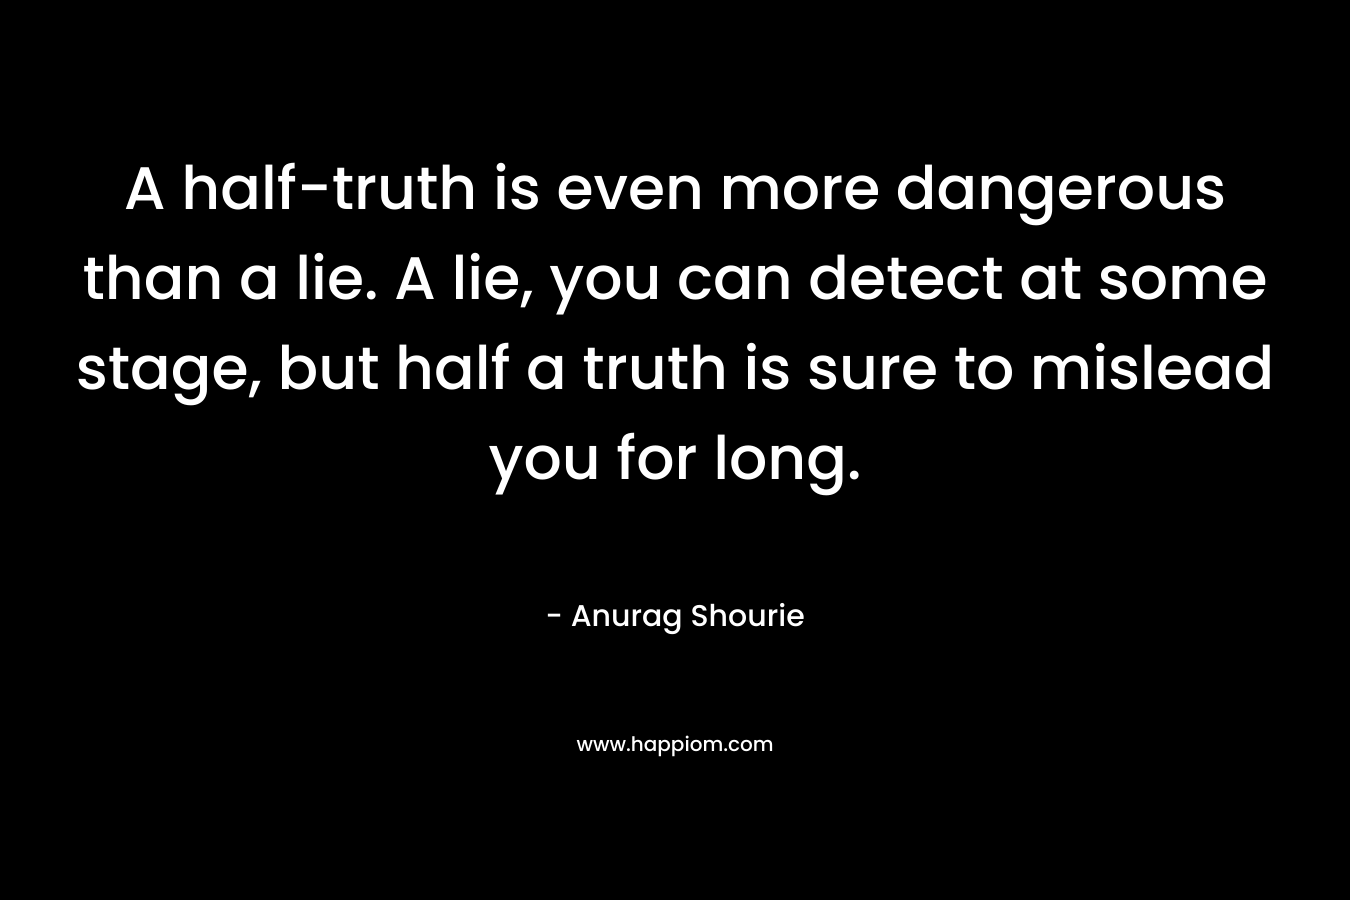 A half-truth is even more dangerous than a lie. A lie, you can detect at some stage, but half a truth is sure to mislead you for long. – Anurag Shourie